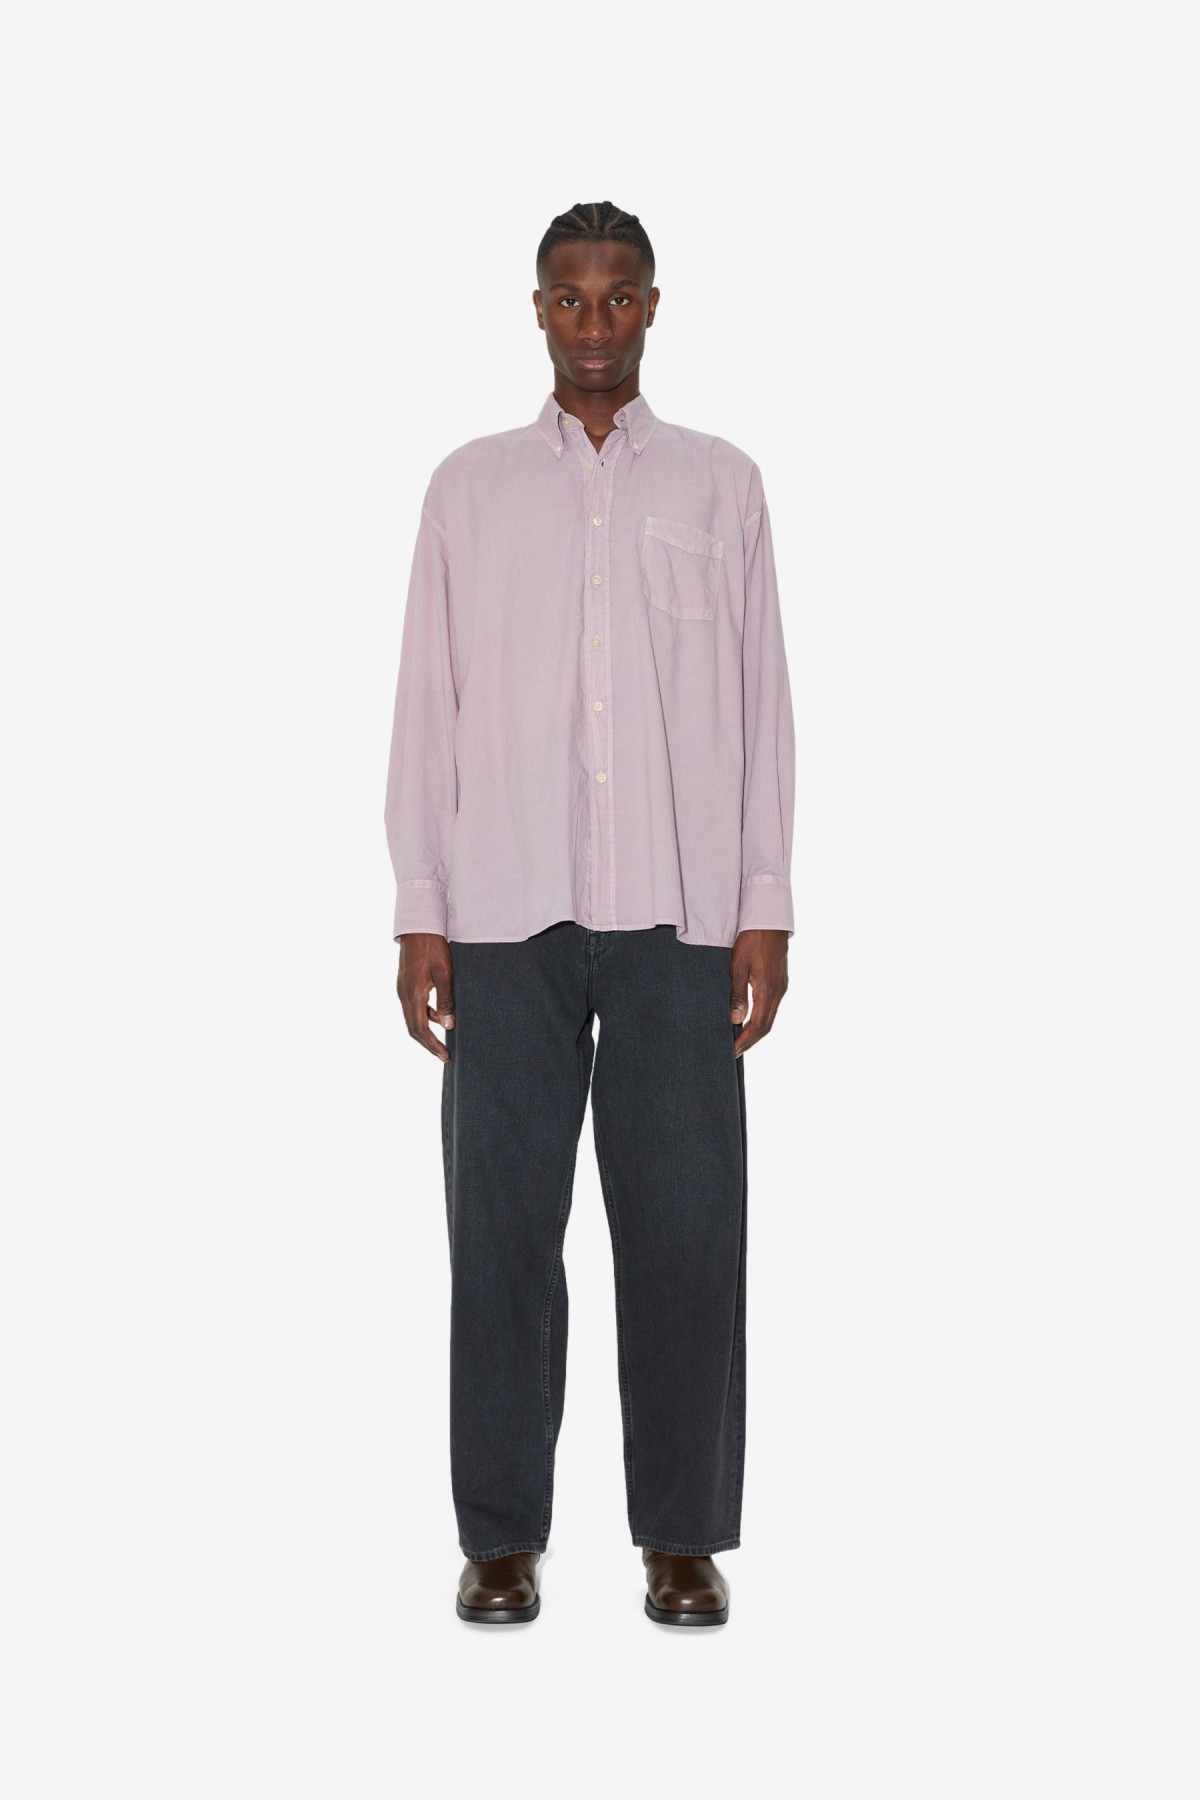 Our Legacy Borrowed BD Shirt in Dusty Lilac Cotton Voile